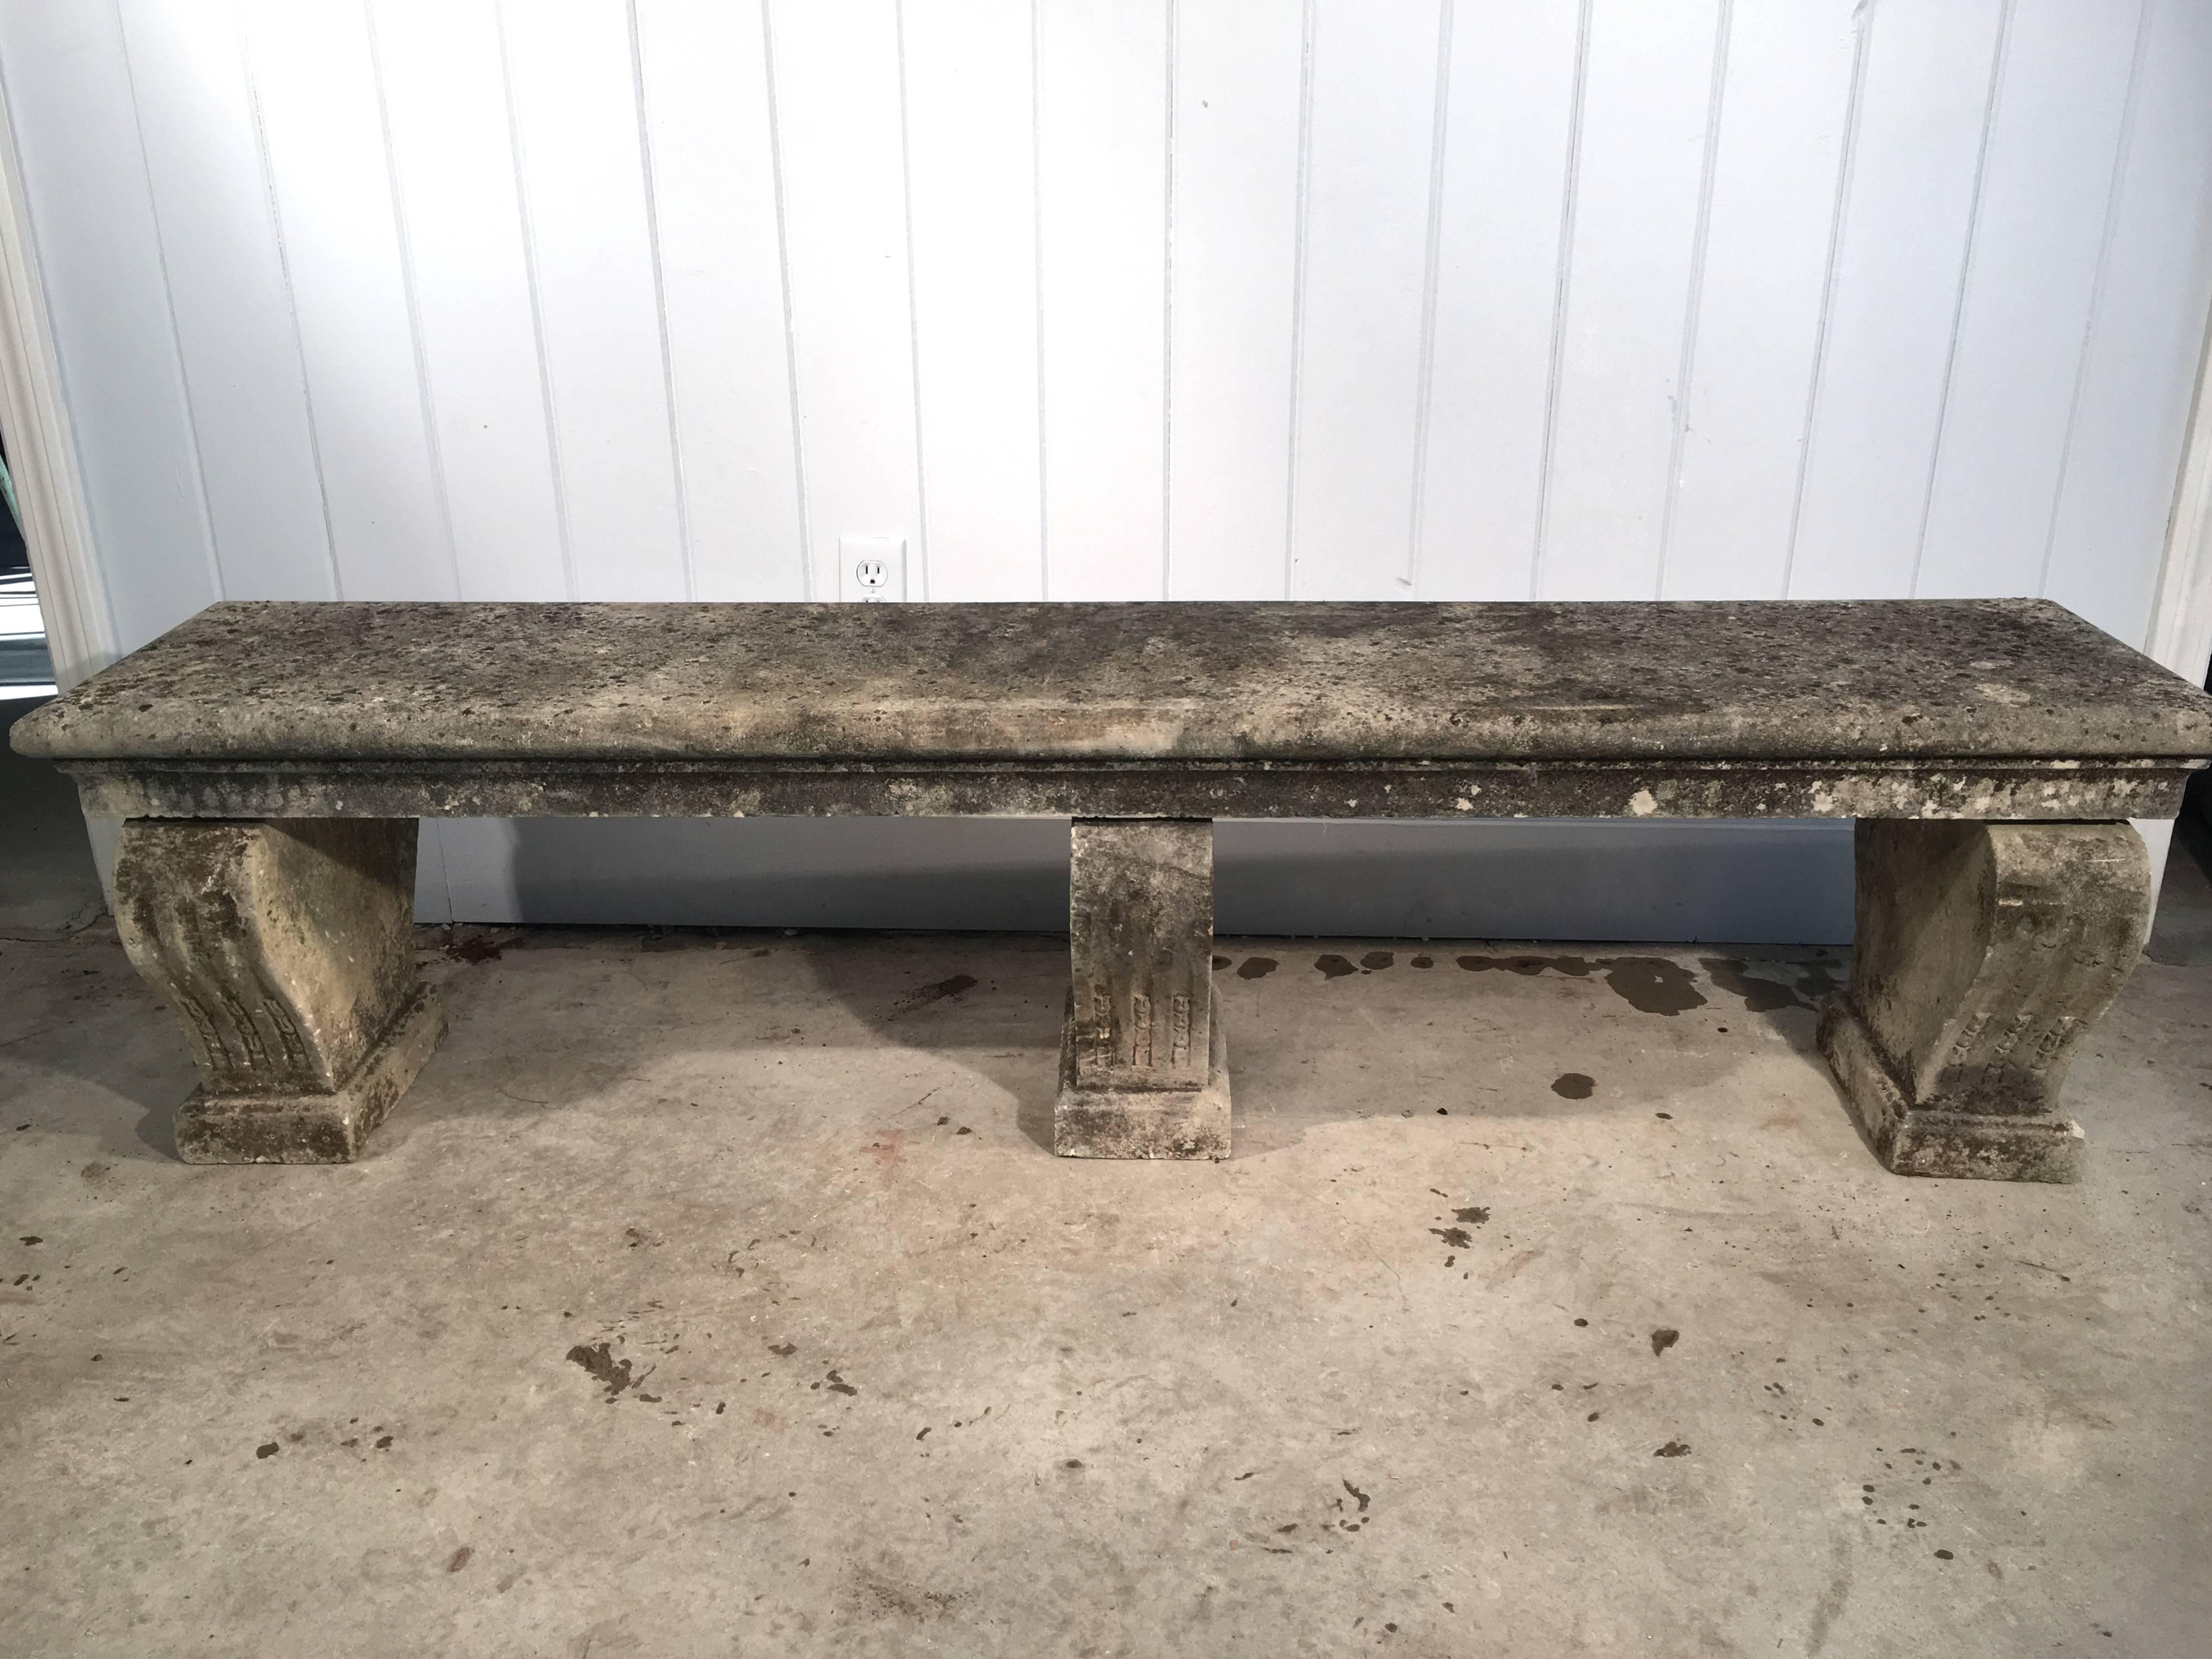 Long carved stone benches are difficult to come by, especially in superb condition. This limestone one is particularly lovely and has a beautifully-weathered patina and three supports. It would be stunning placed at the end of a long allée of